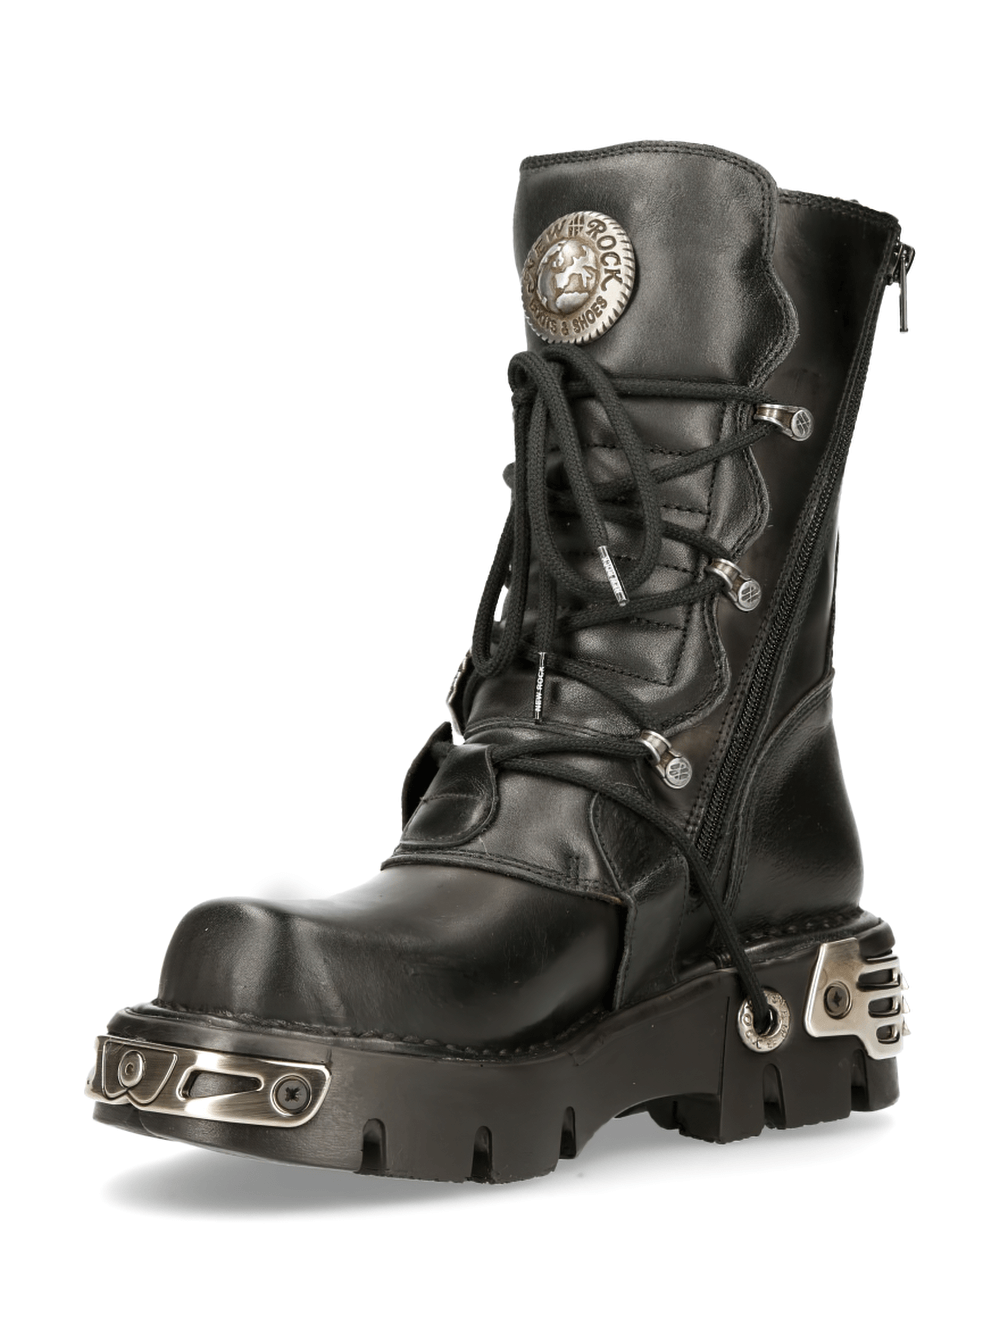 NEW ROCK Rugged Black Reactor Buckle-Laced Boots